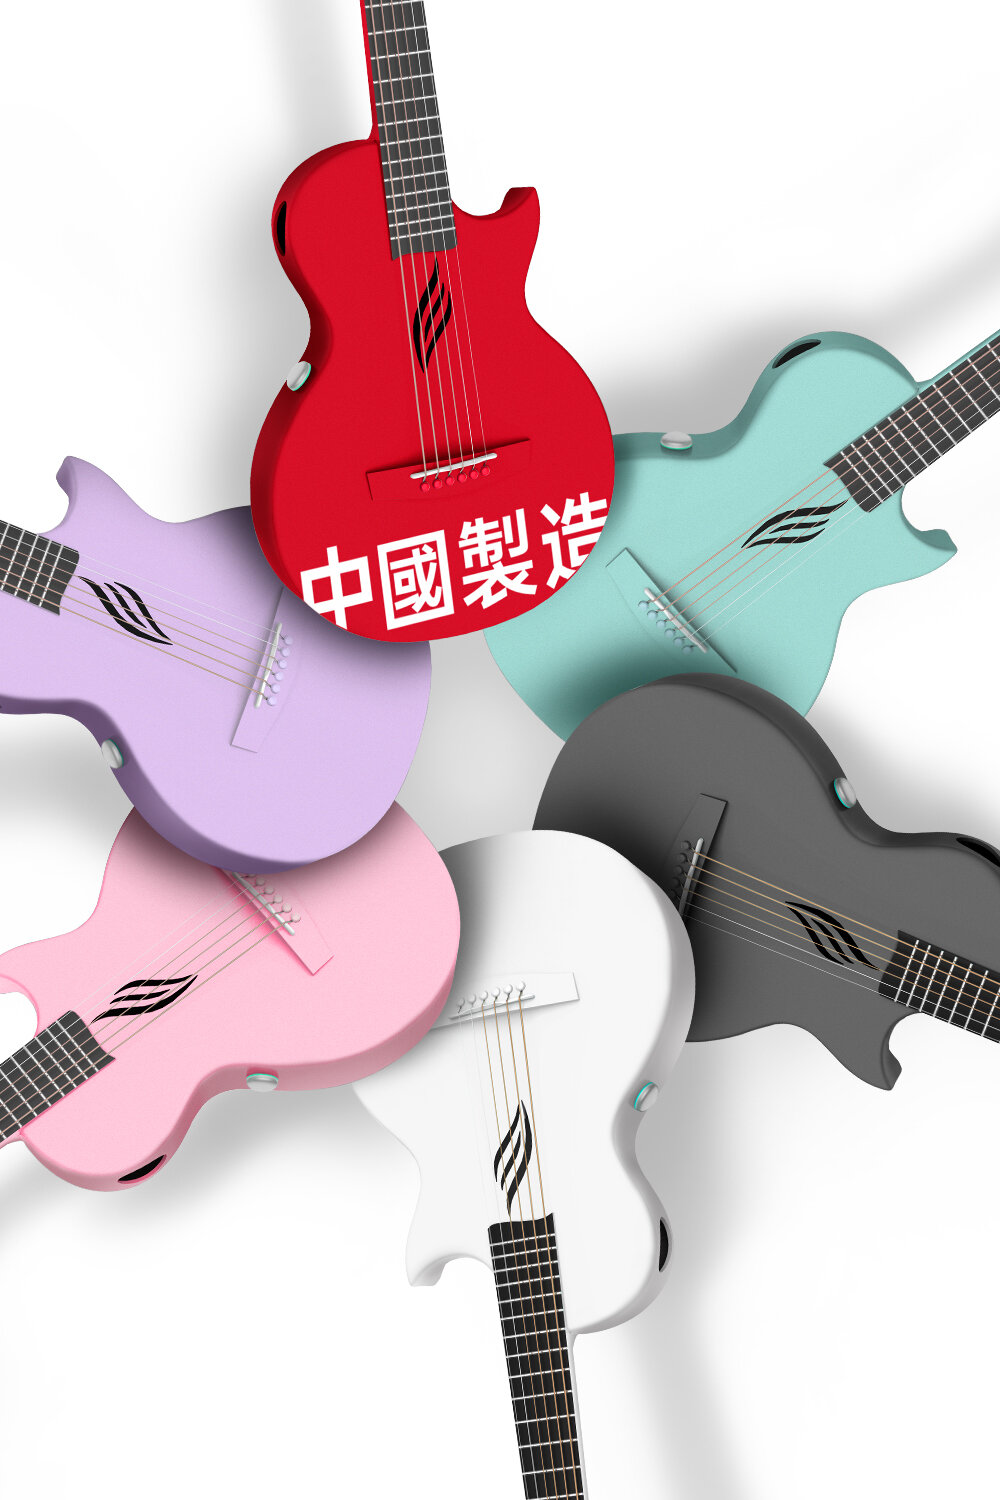 Easy and extraordinary performance experience - Ultra-thin, light, sleek, cool and handsome electric guitar shape, perfect suitable for children, traveling, and stage performance, bringing you an easy and extraordinary experience of playing.Perfect suitable for children, traveling, and stage performance!